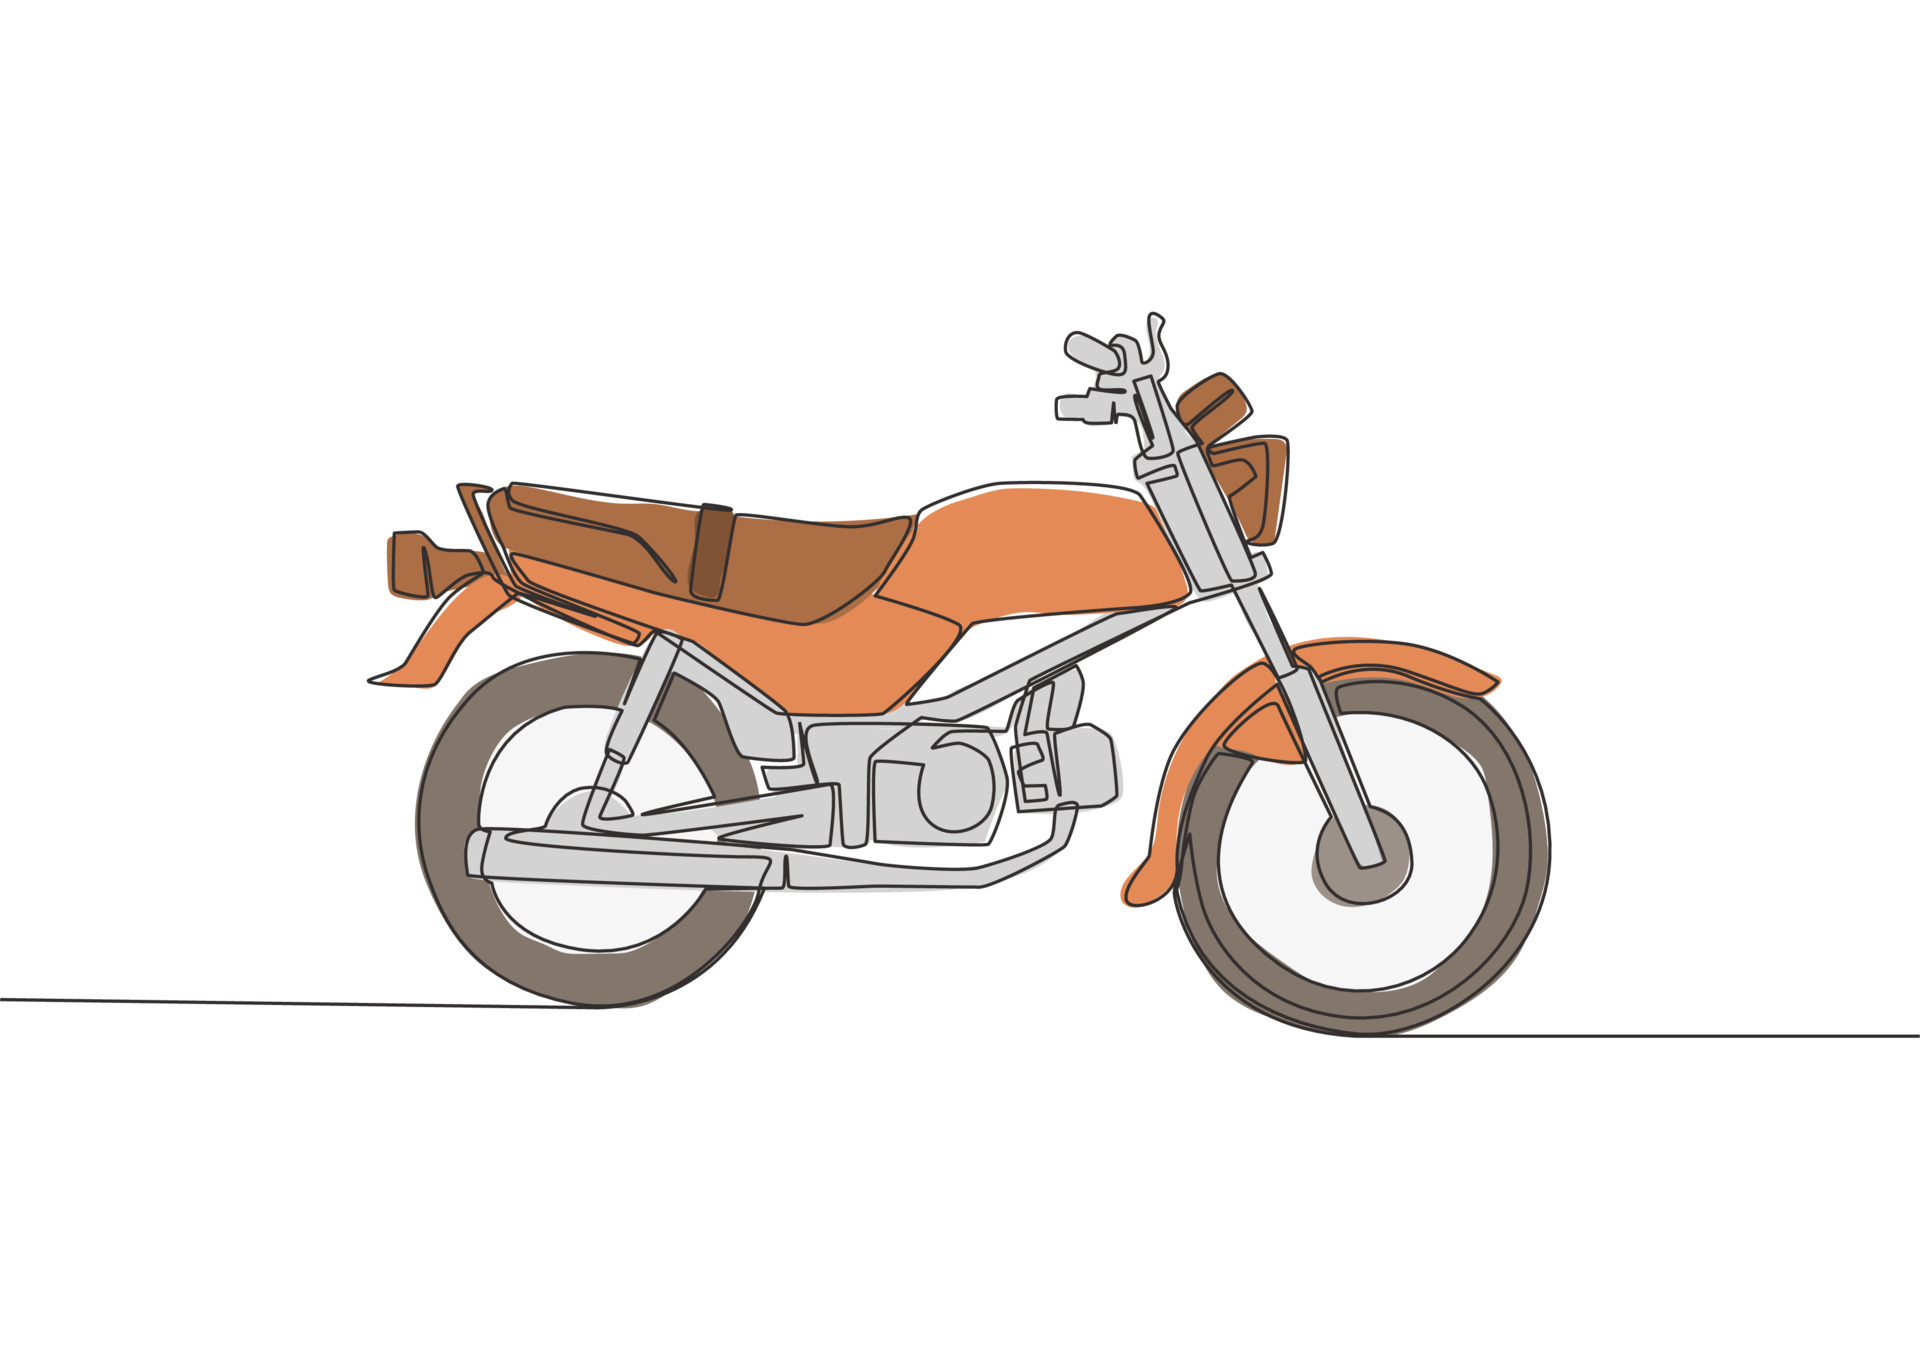 Single continuous line drawing of classic motorbike logo. Rural